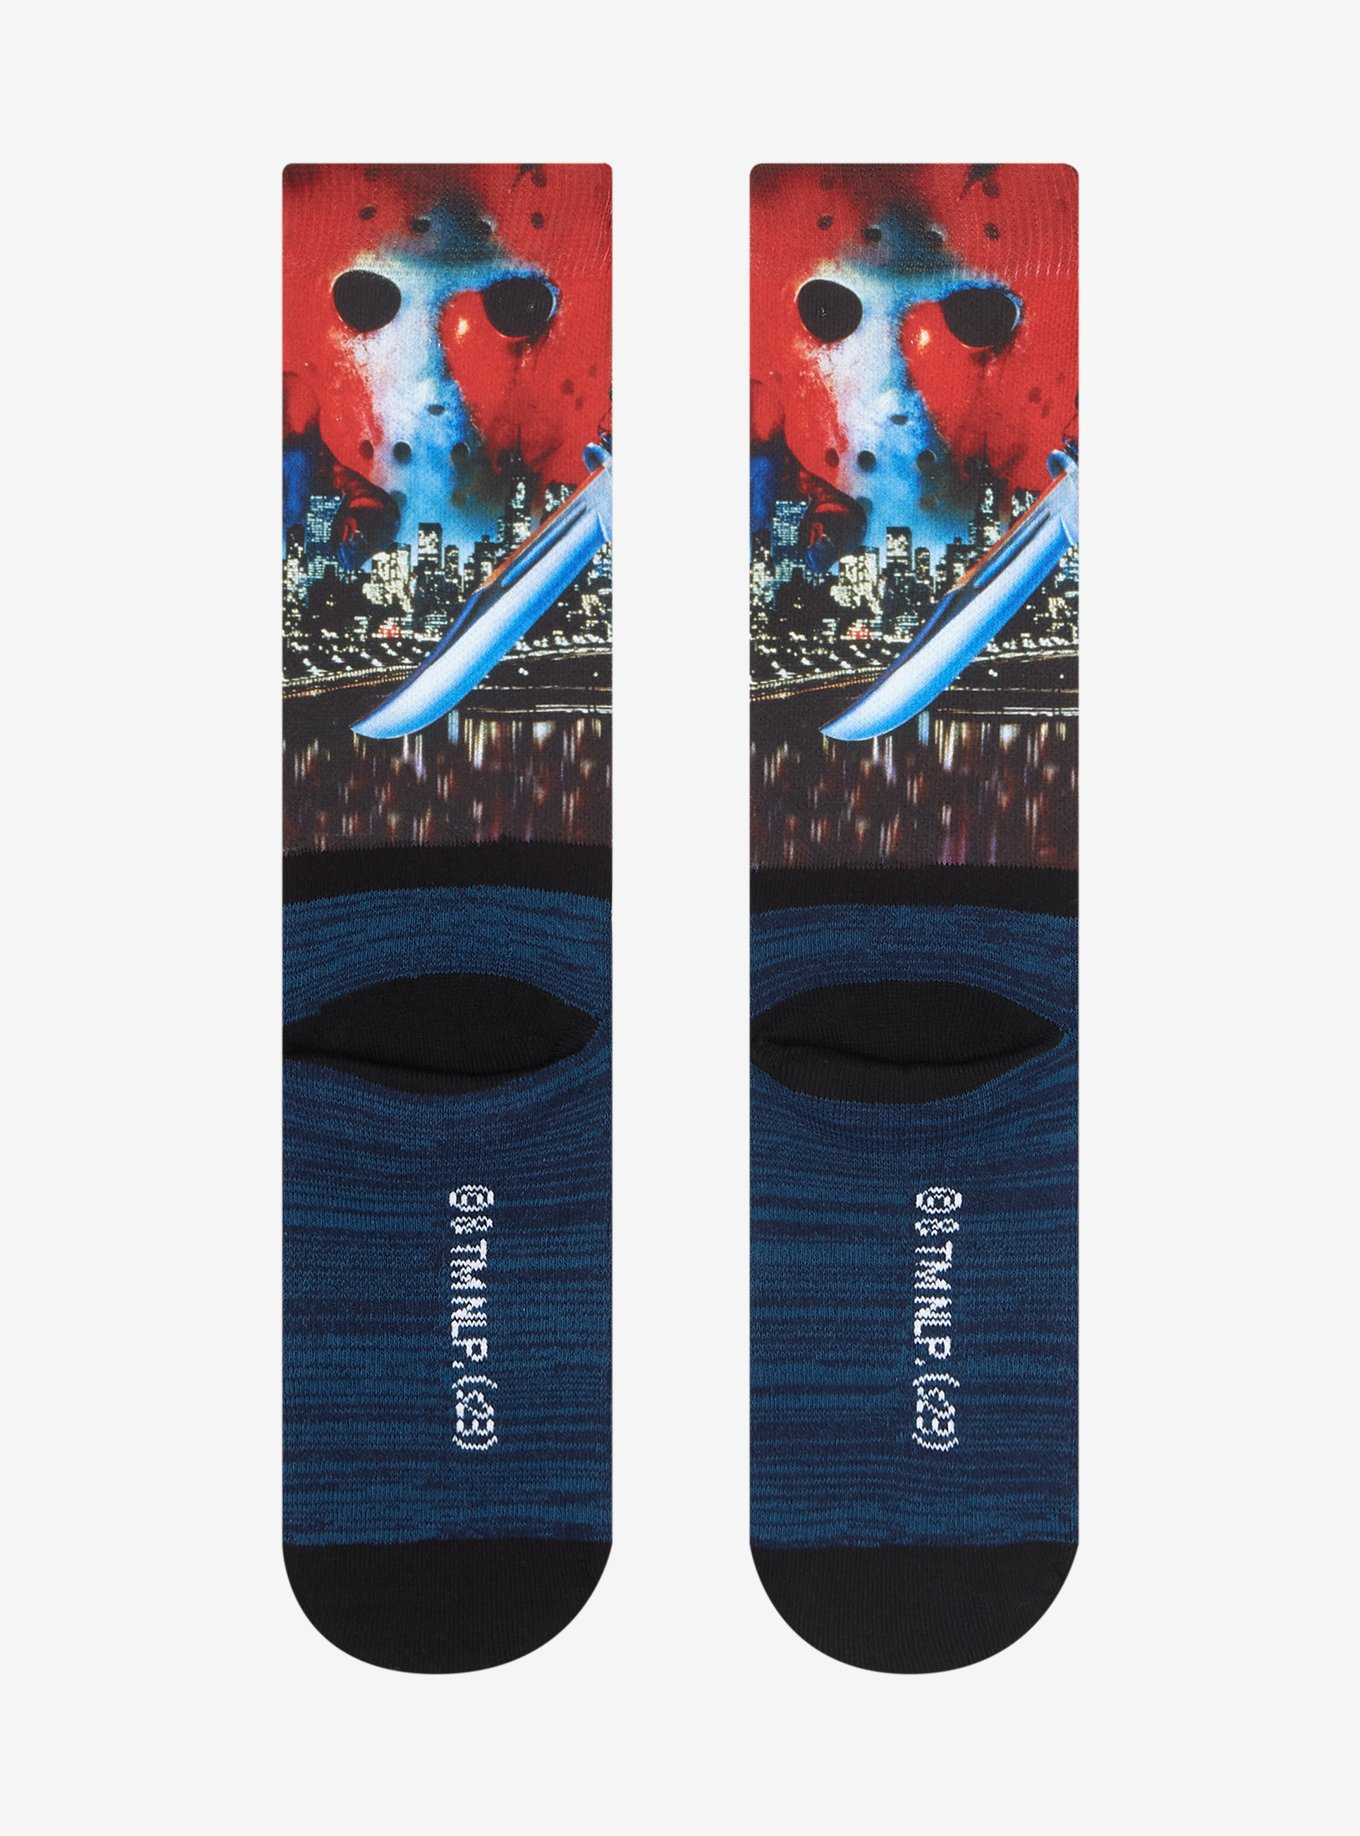 Friday The 13th No Place To Hide Crew Socks, , hi-res